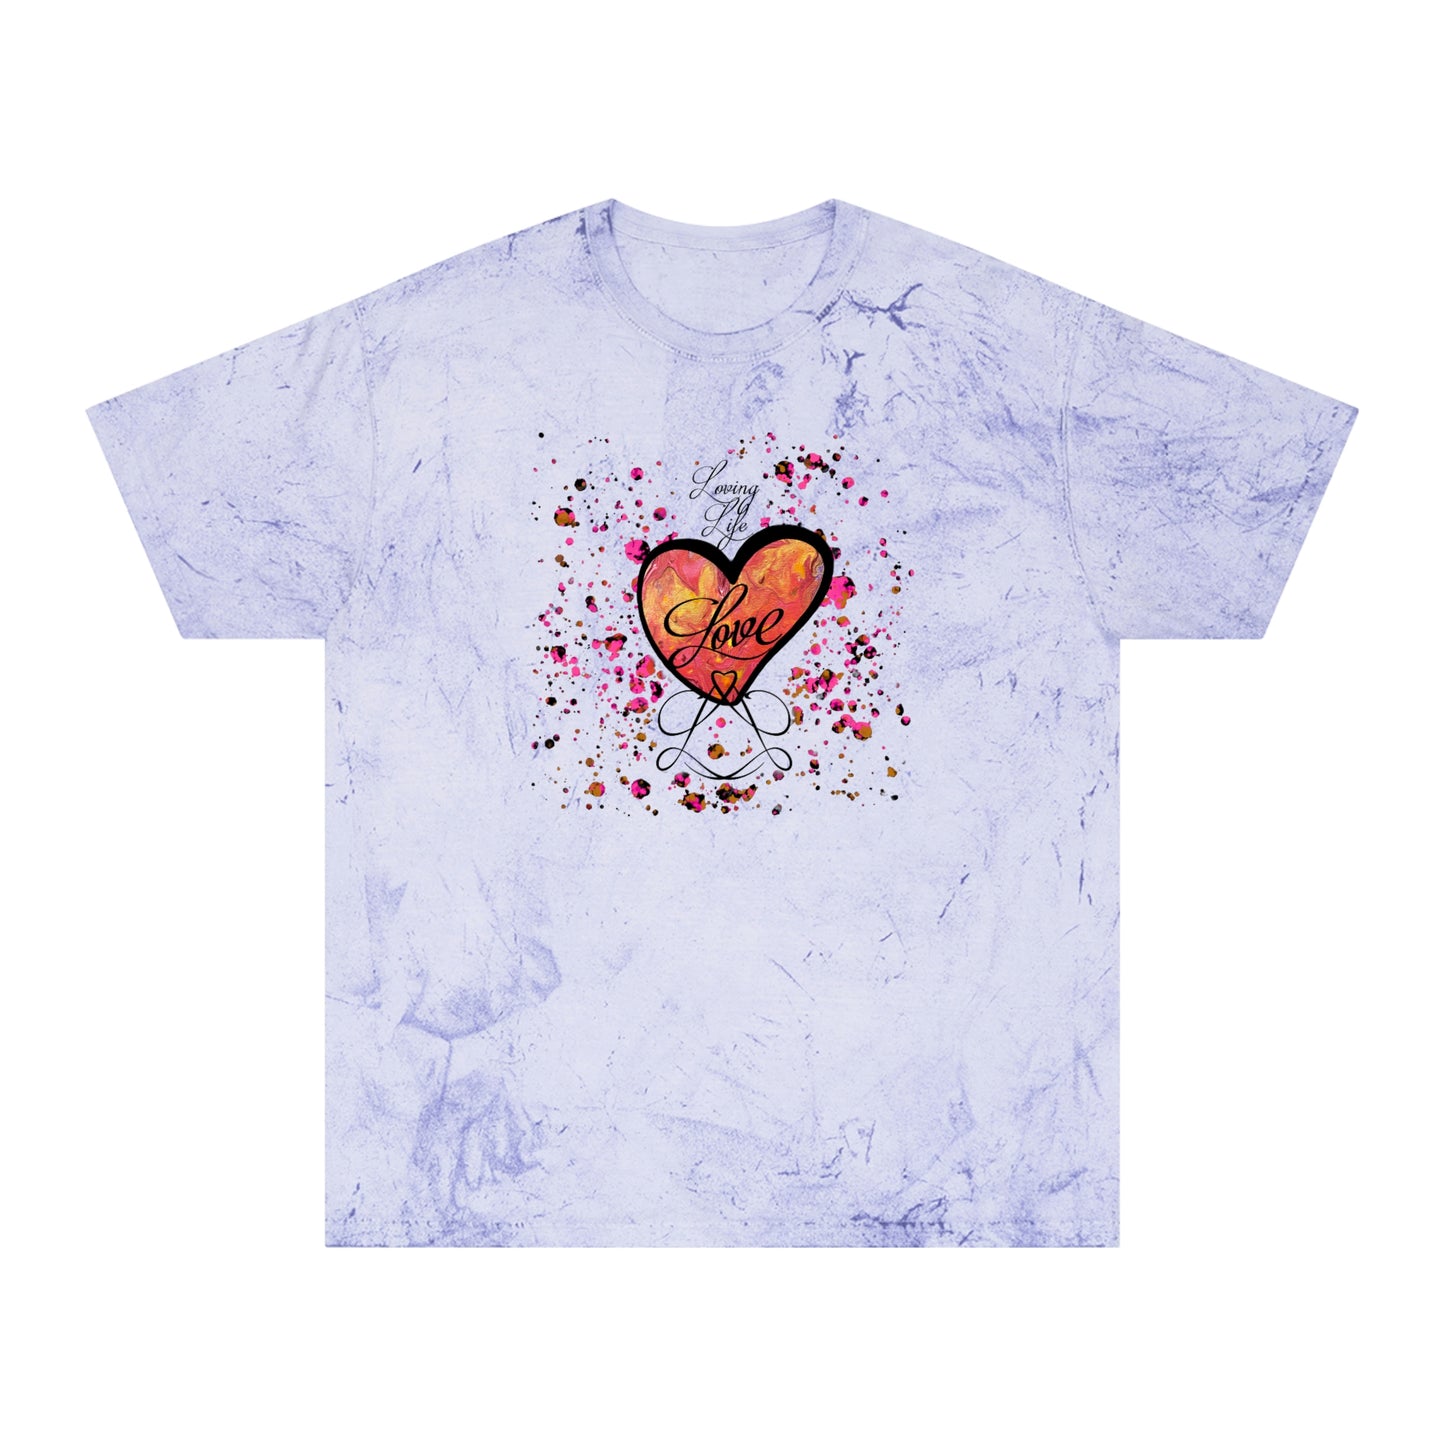 Stone-washed T-Shirt - LL/Love